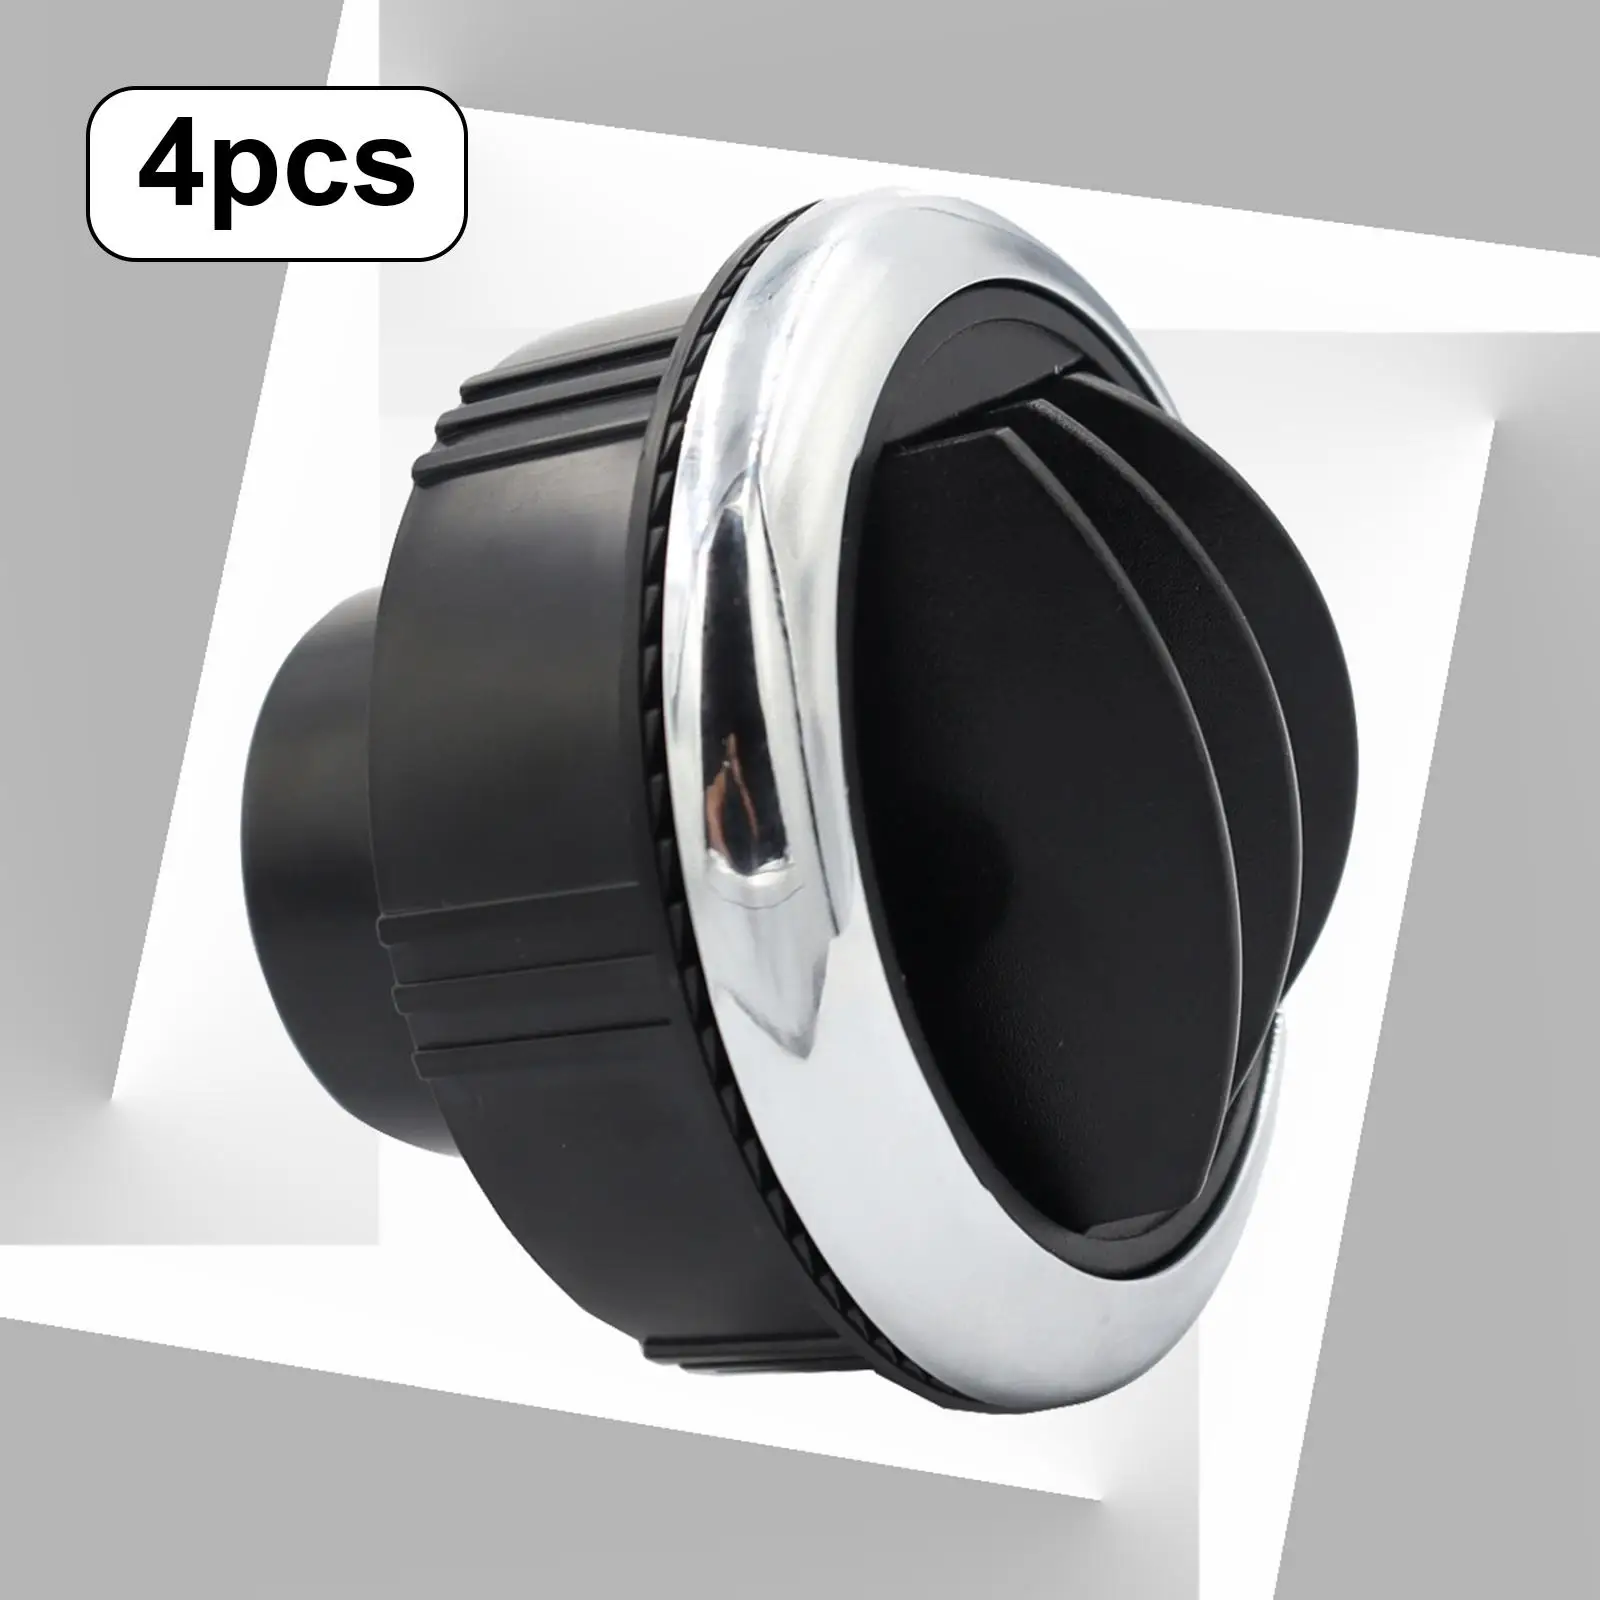 4Pcs RV Boat Yacht Dashboard AC Air Vent Simple Installation Replace Parts Outer Diameter 8.7cm Accessories Electroplate Knob